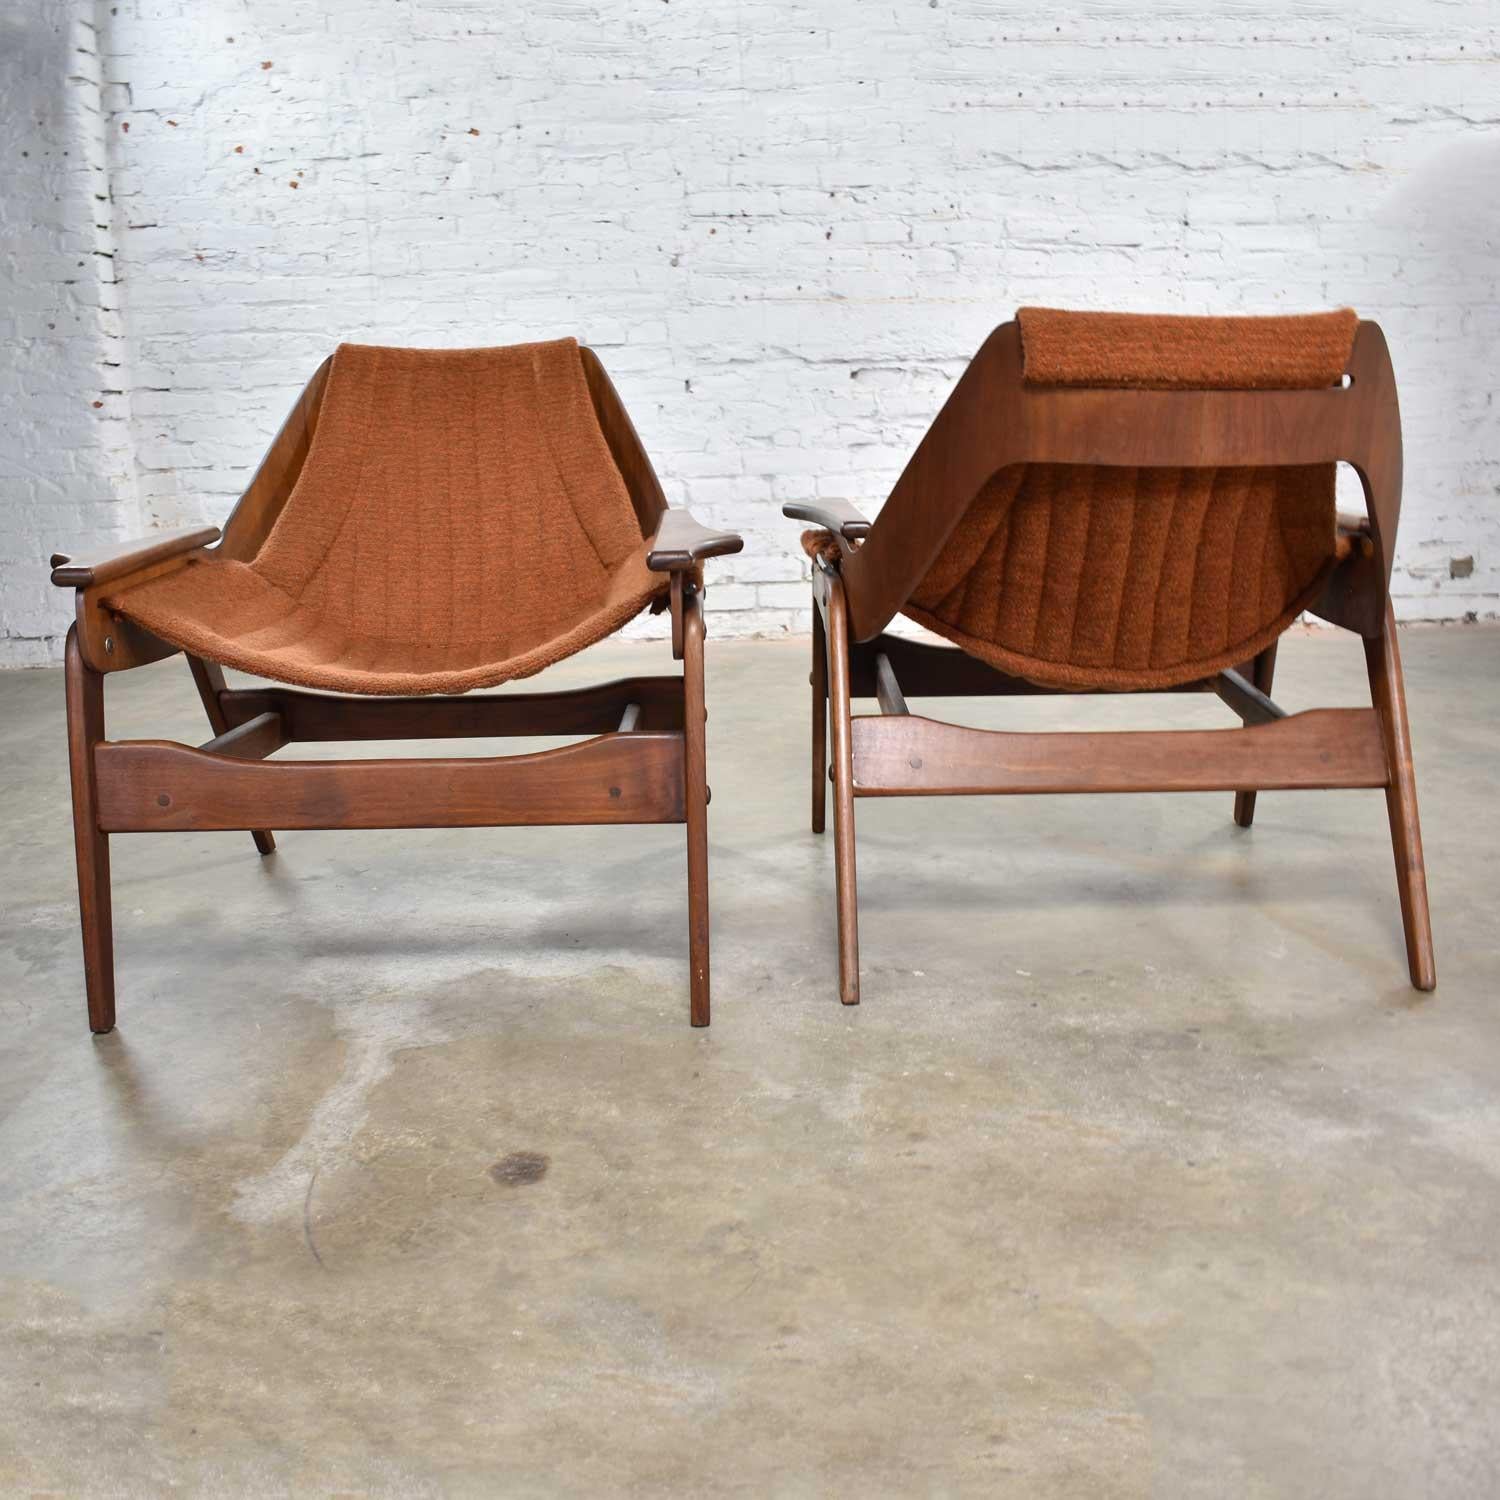 American Mid-Century Modern Triumph I Sling Chairs by Jerry Johnson for Charlton a Pair